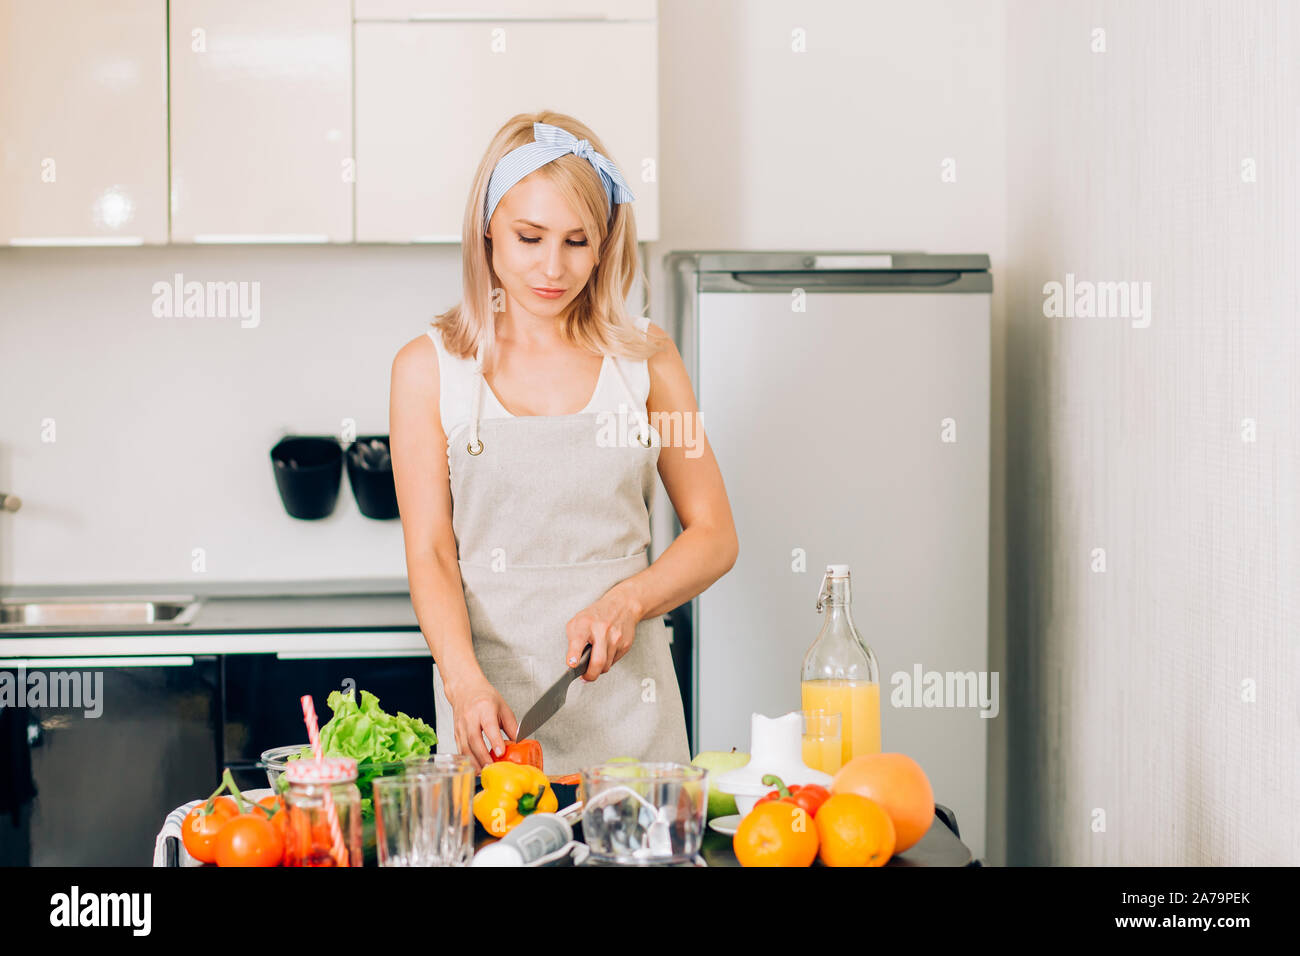 https://c8.alamy.com/comp/2A79PEK/healthy-food-diet-concept-lovely-european-blonde-woman-in-apron-with-headband-cooking-vegetable-salad-for-dinner-cutting-tomatoes-on-chopping-boa-2A79PEK.jpg